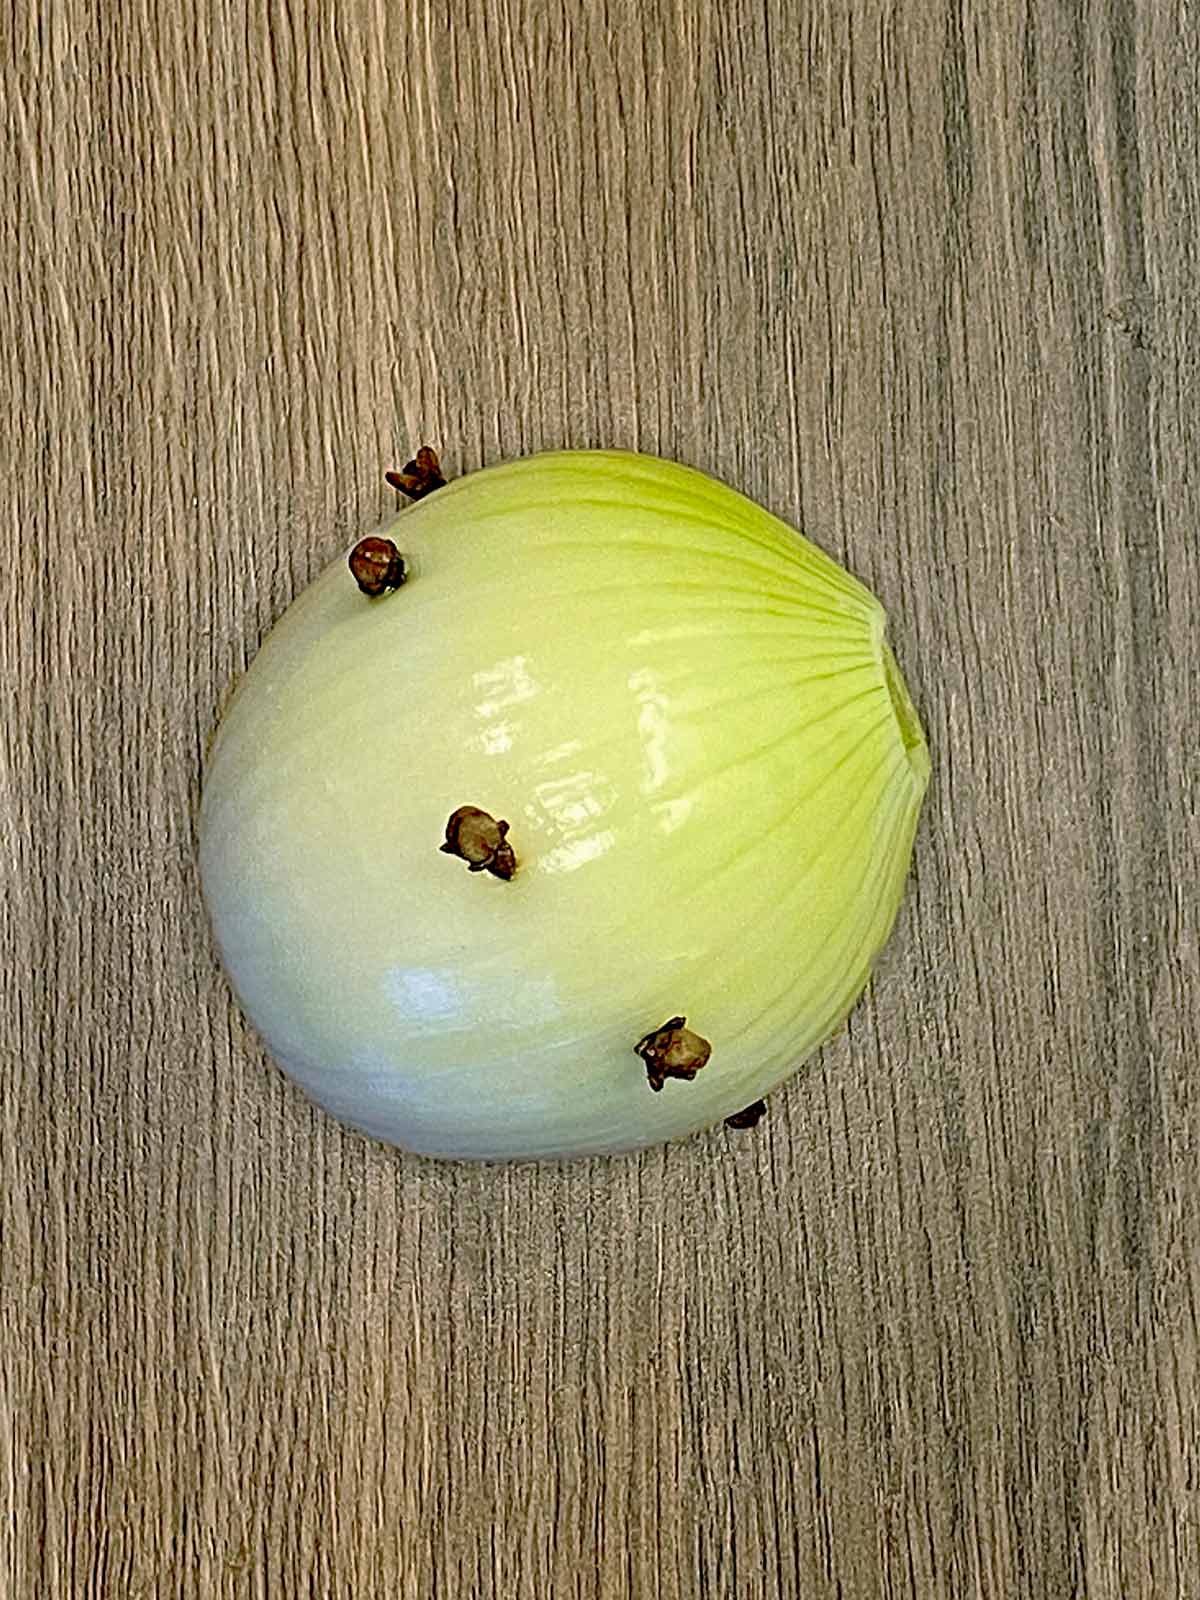 An onion with cloves pushed into it.